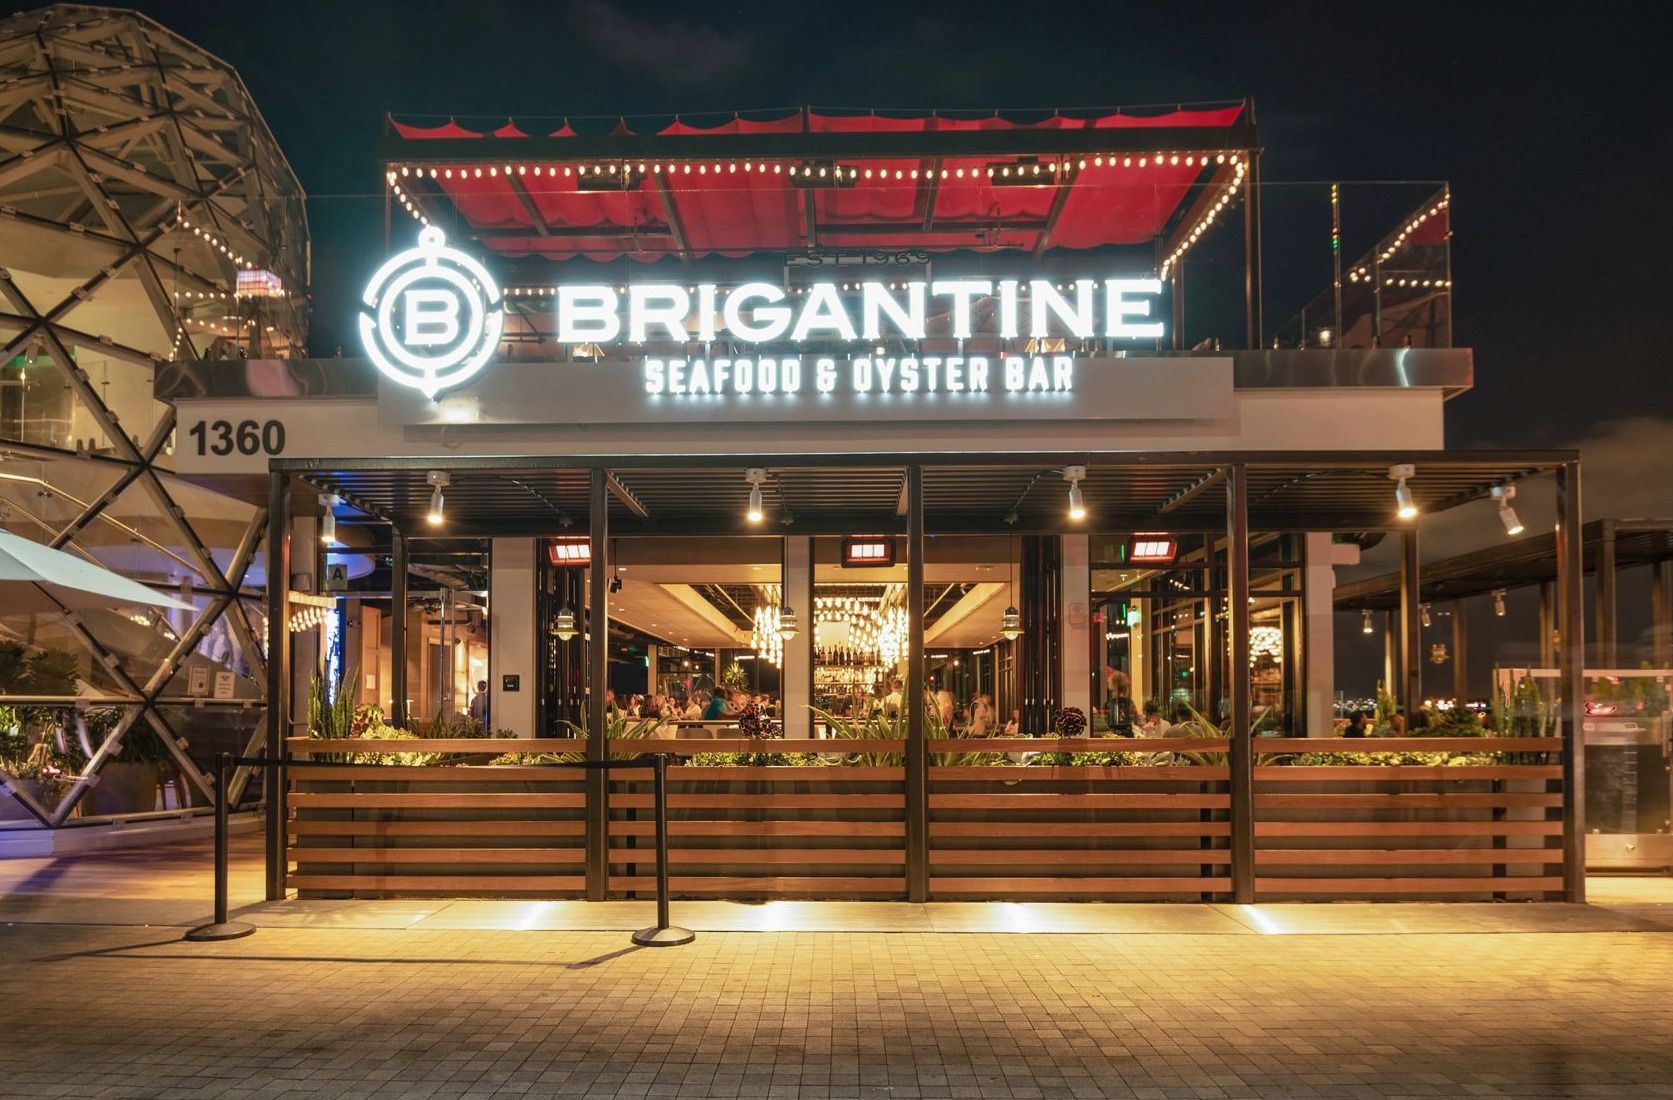 Brigantine Seafood and Oyster Bar Storefront